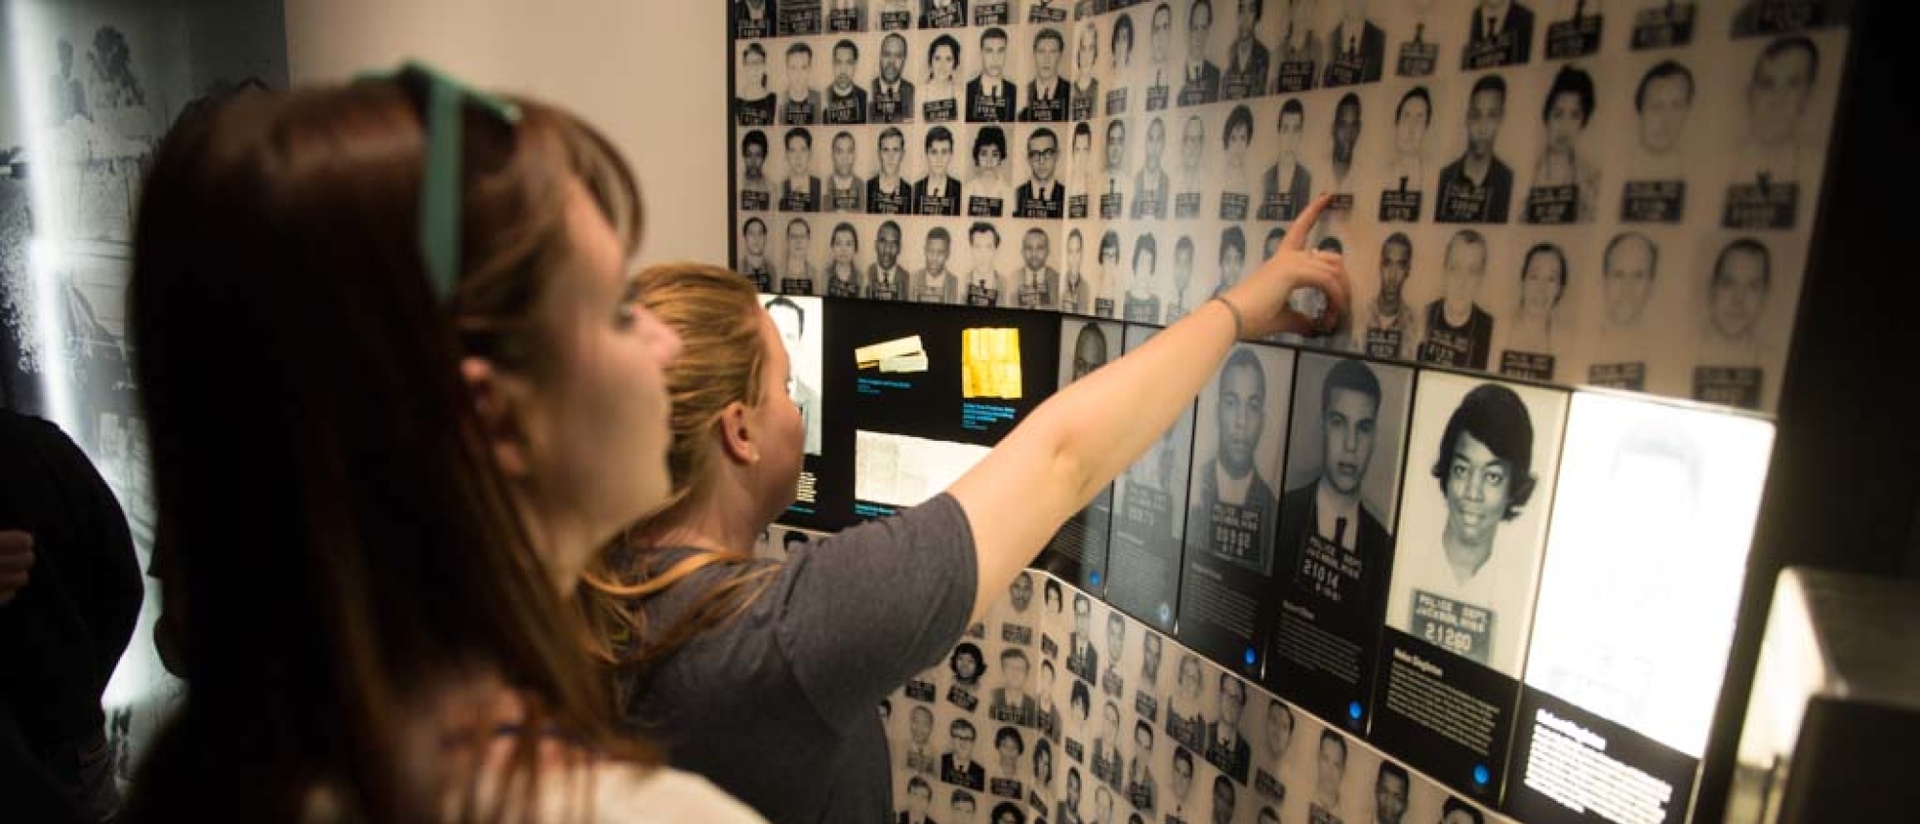 Student study board during Civil Rights Pilgrimage